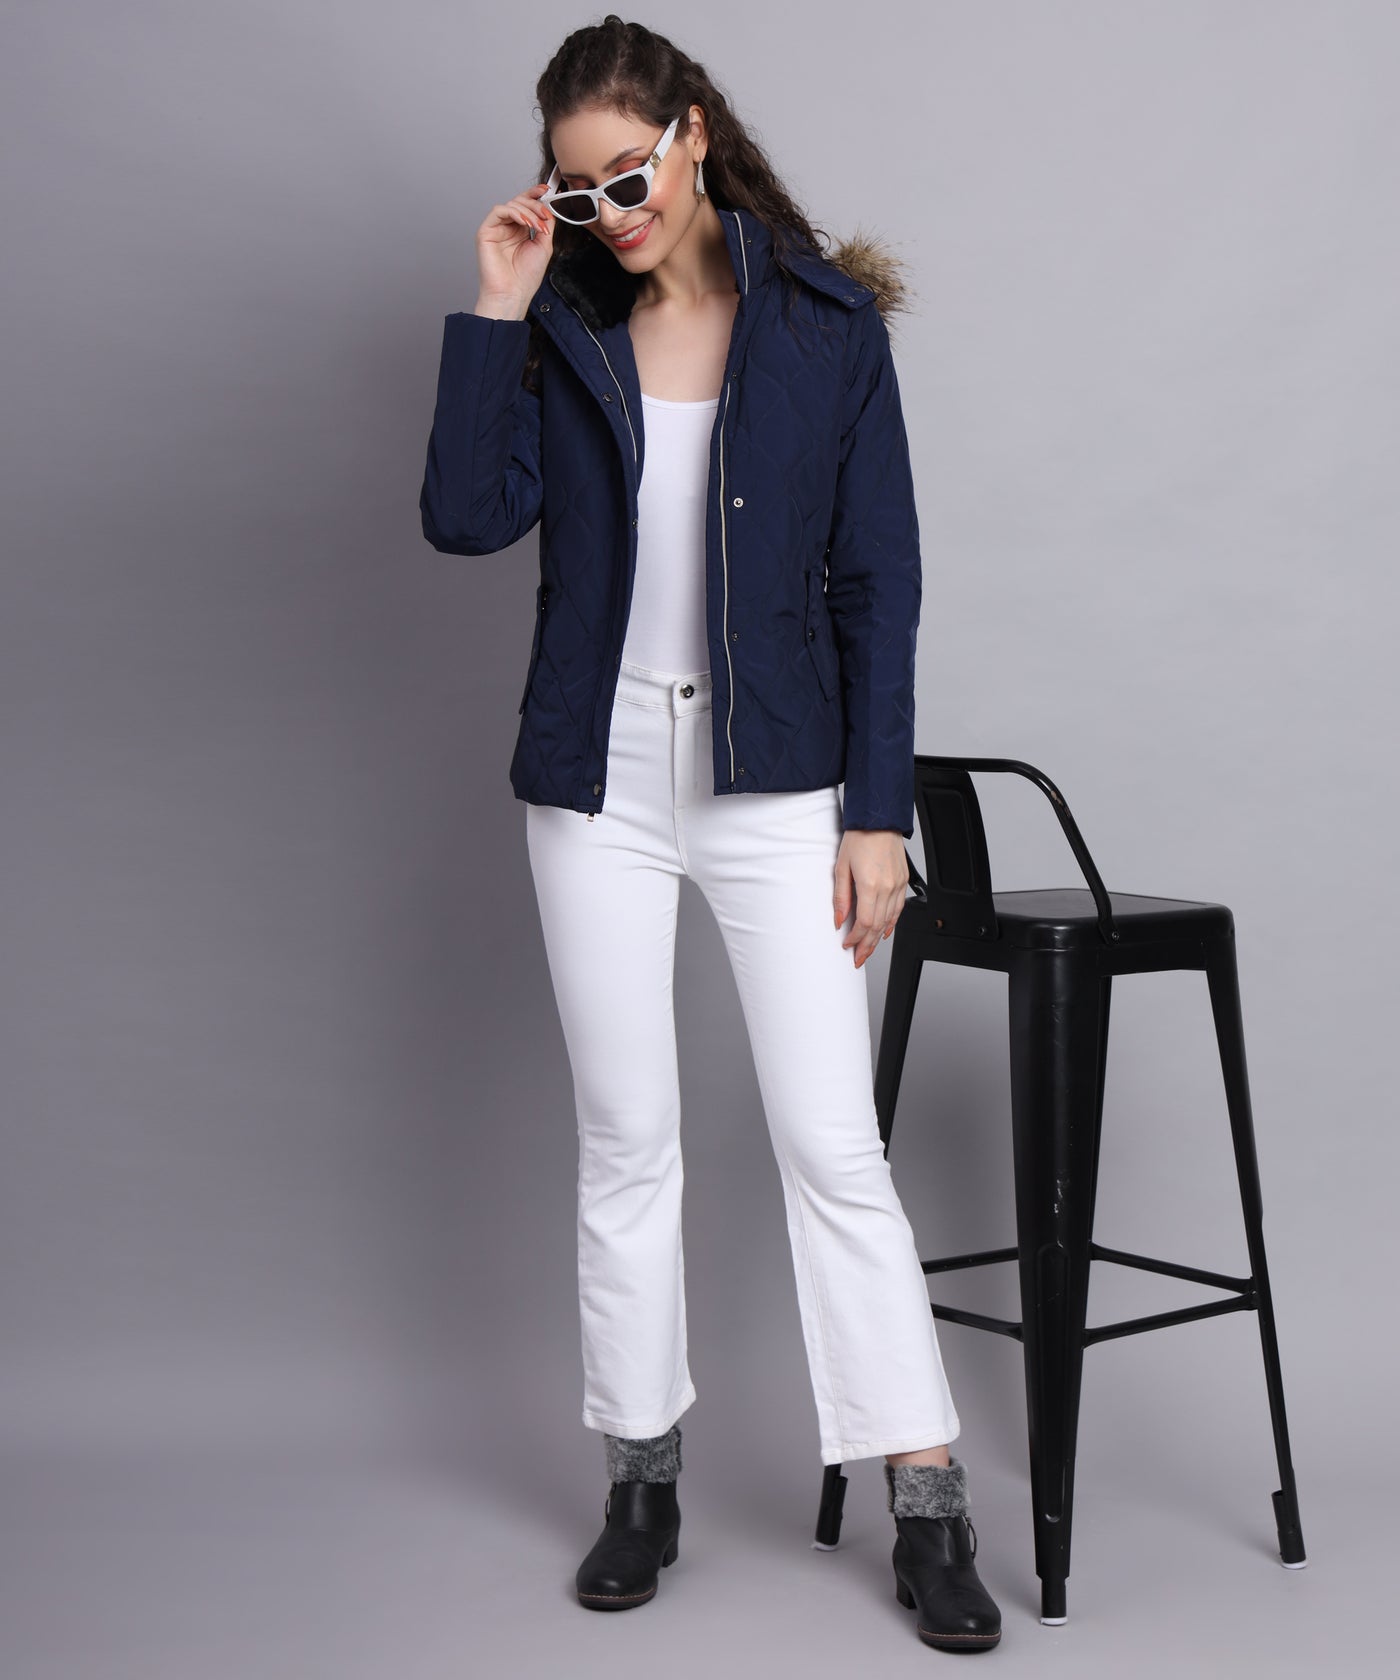 Navy Diamond quilted jacket- AW6130